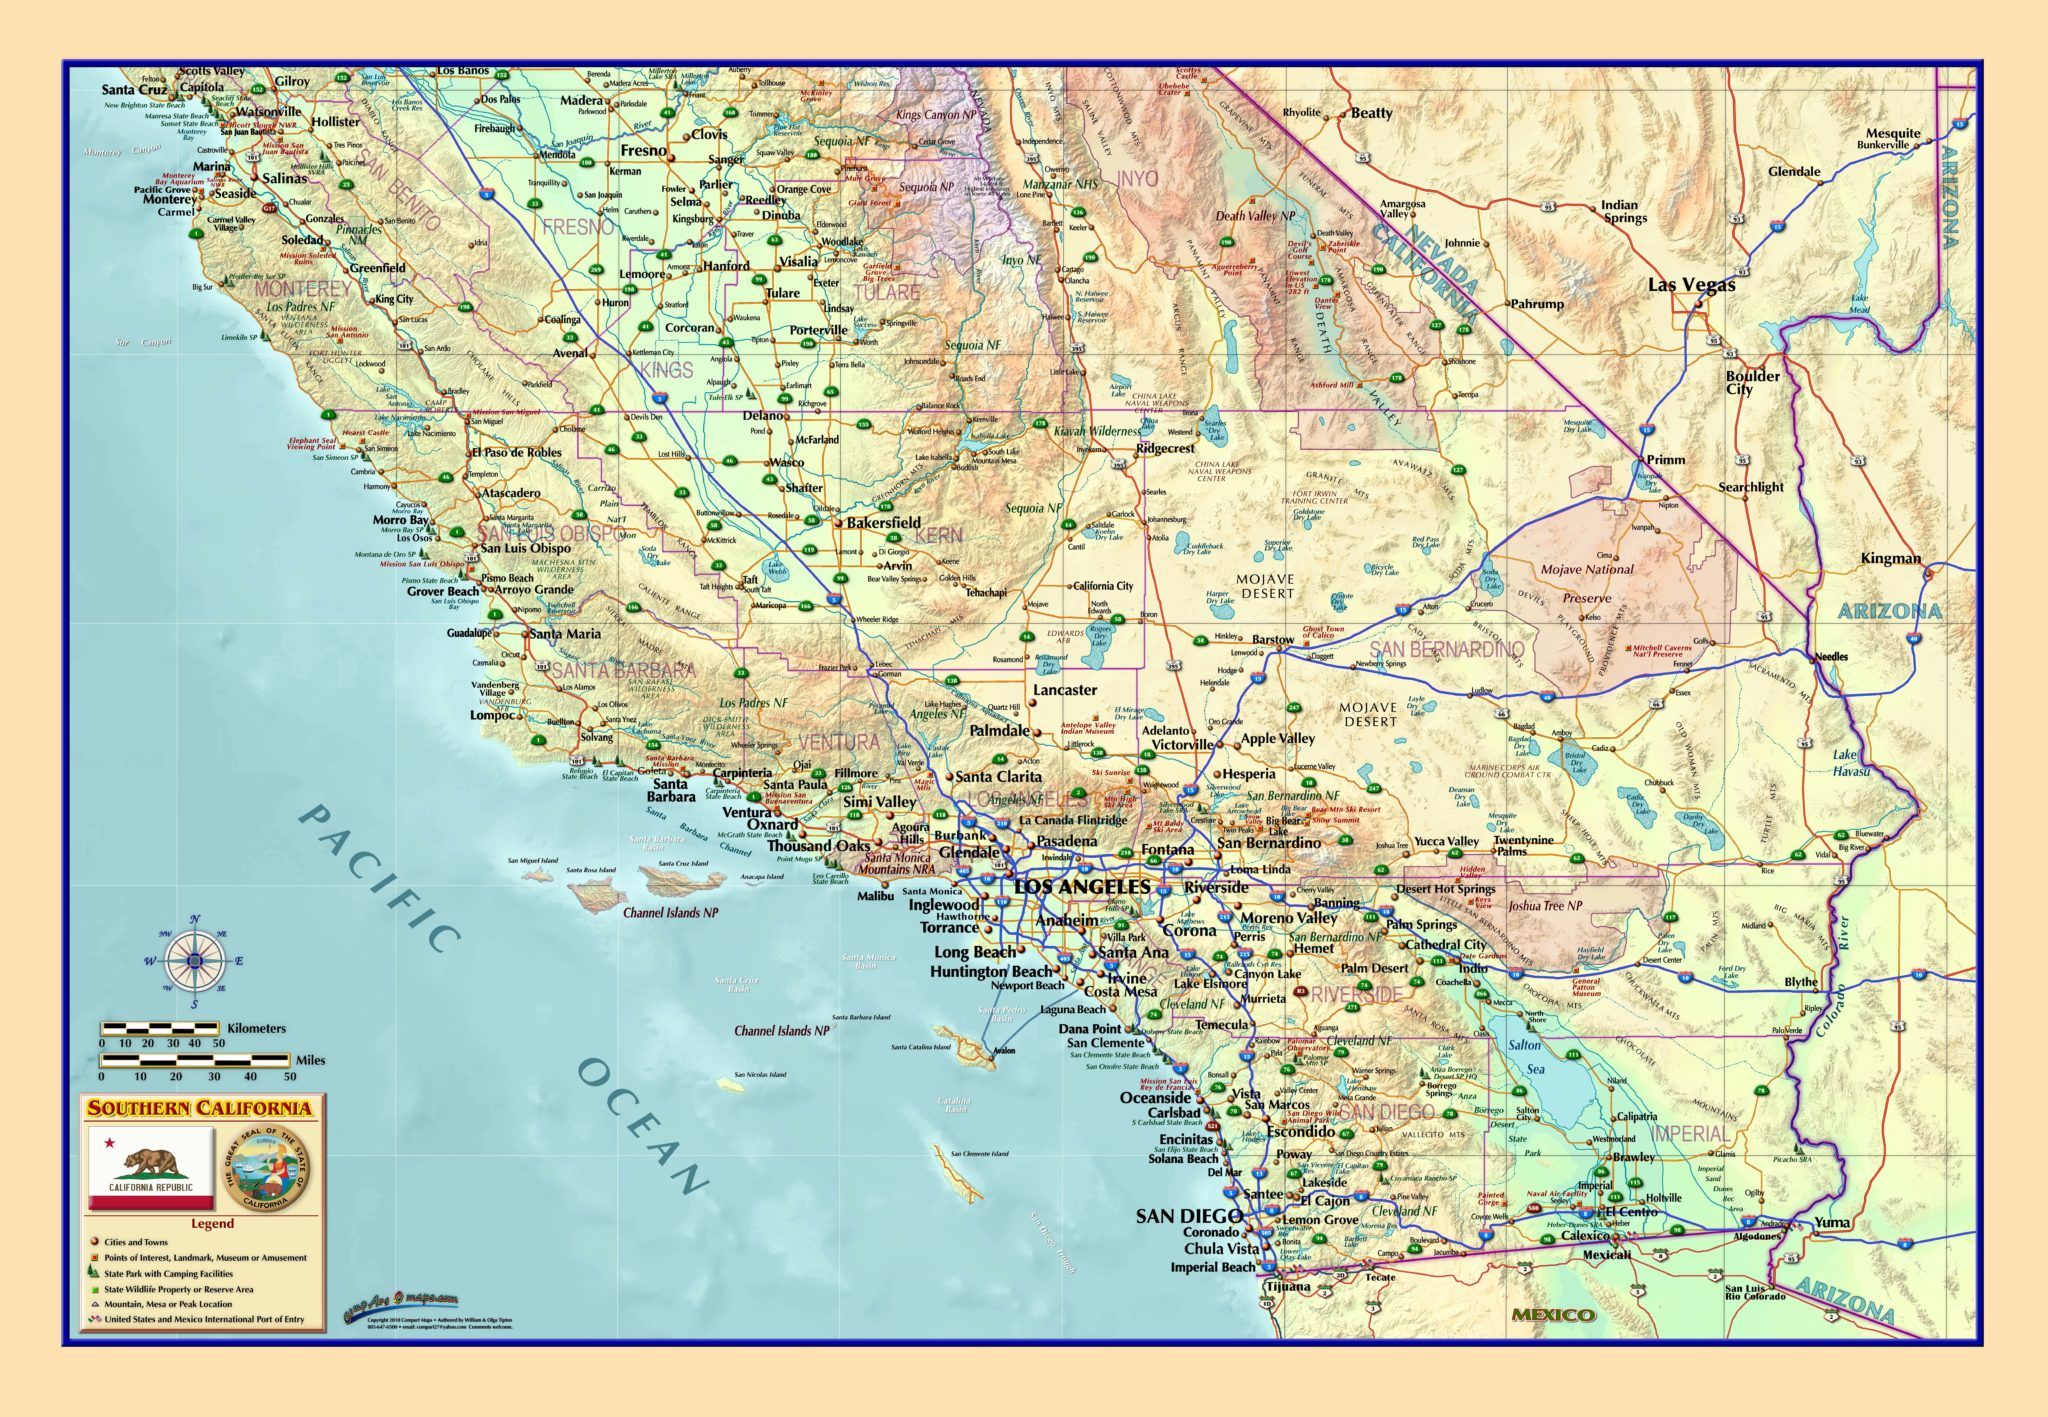 Southern California Wall Map - The Map Shop - Map Of Southeastern California